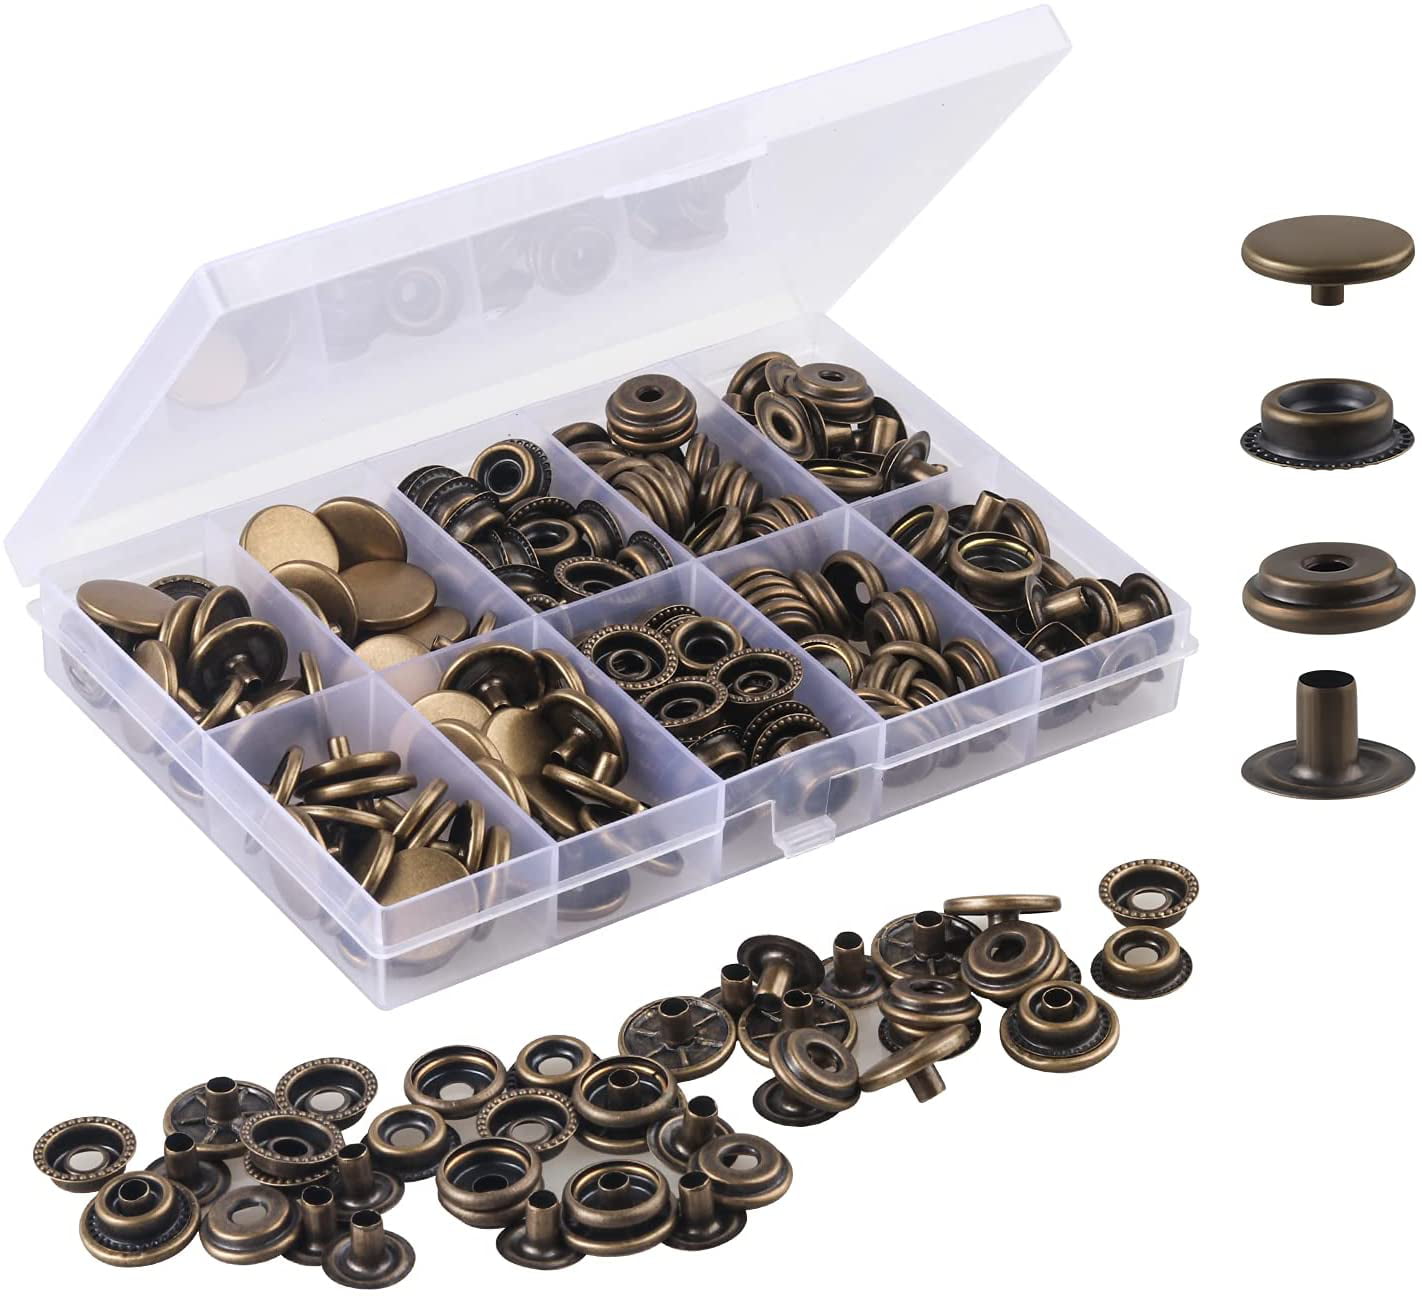 Fabric 200 Pcs 50 Sets Leather Snap Fastener Kit Tool 5/8 inches Clothes Snaps for Leather Press Studs Stainless Snap Buttons for Bag 15mm Jeans Silver+Bronze 